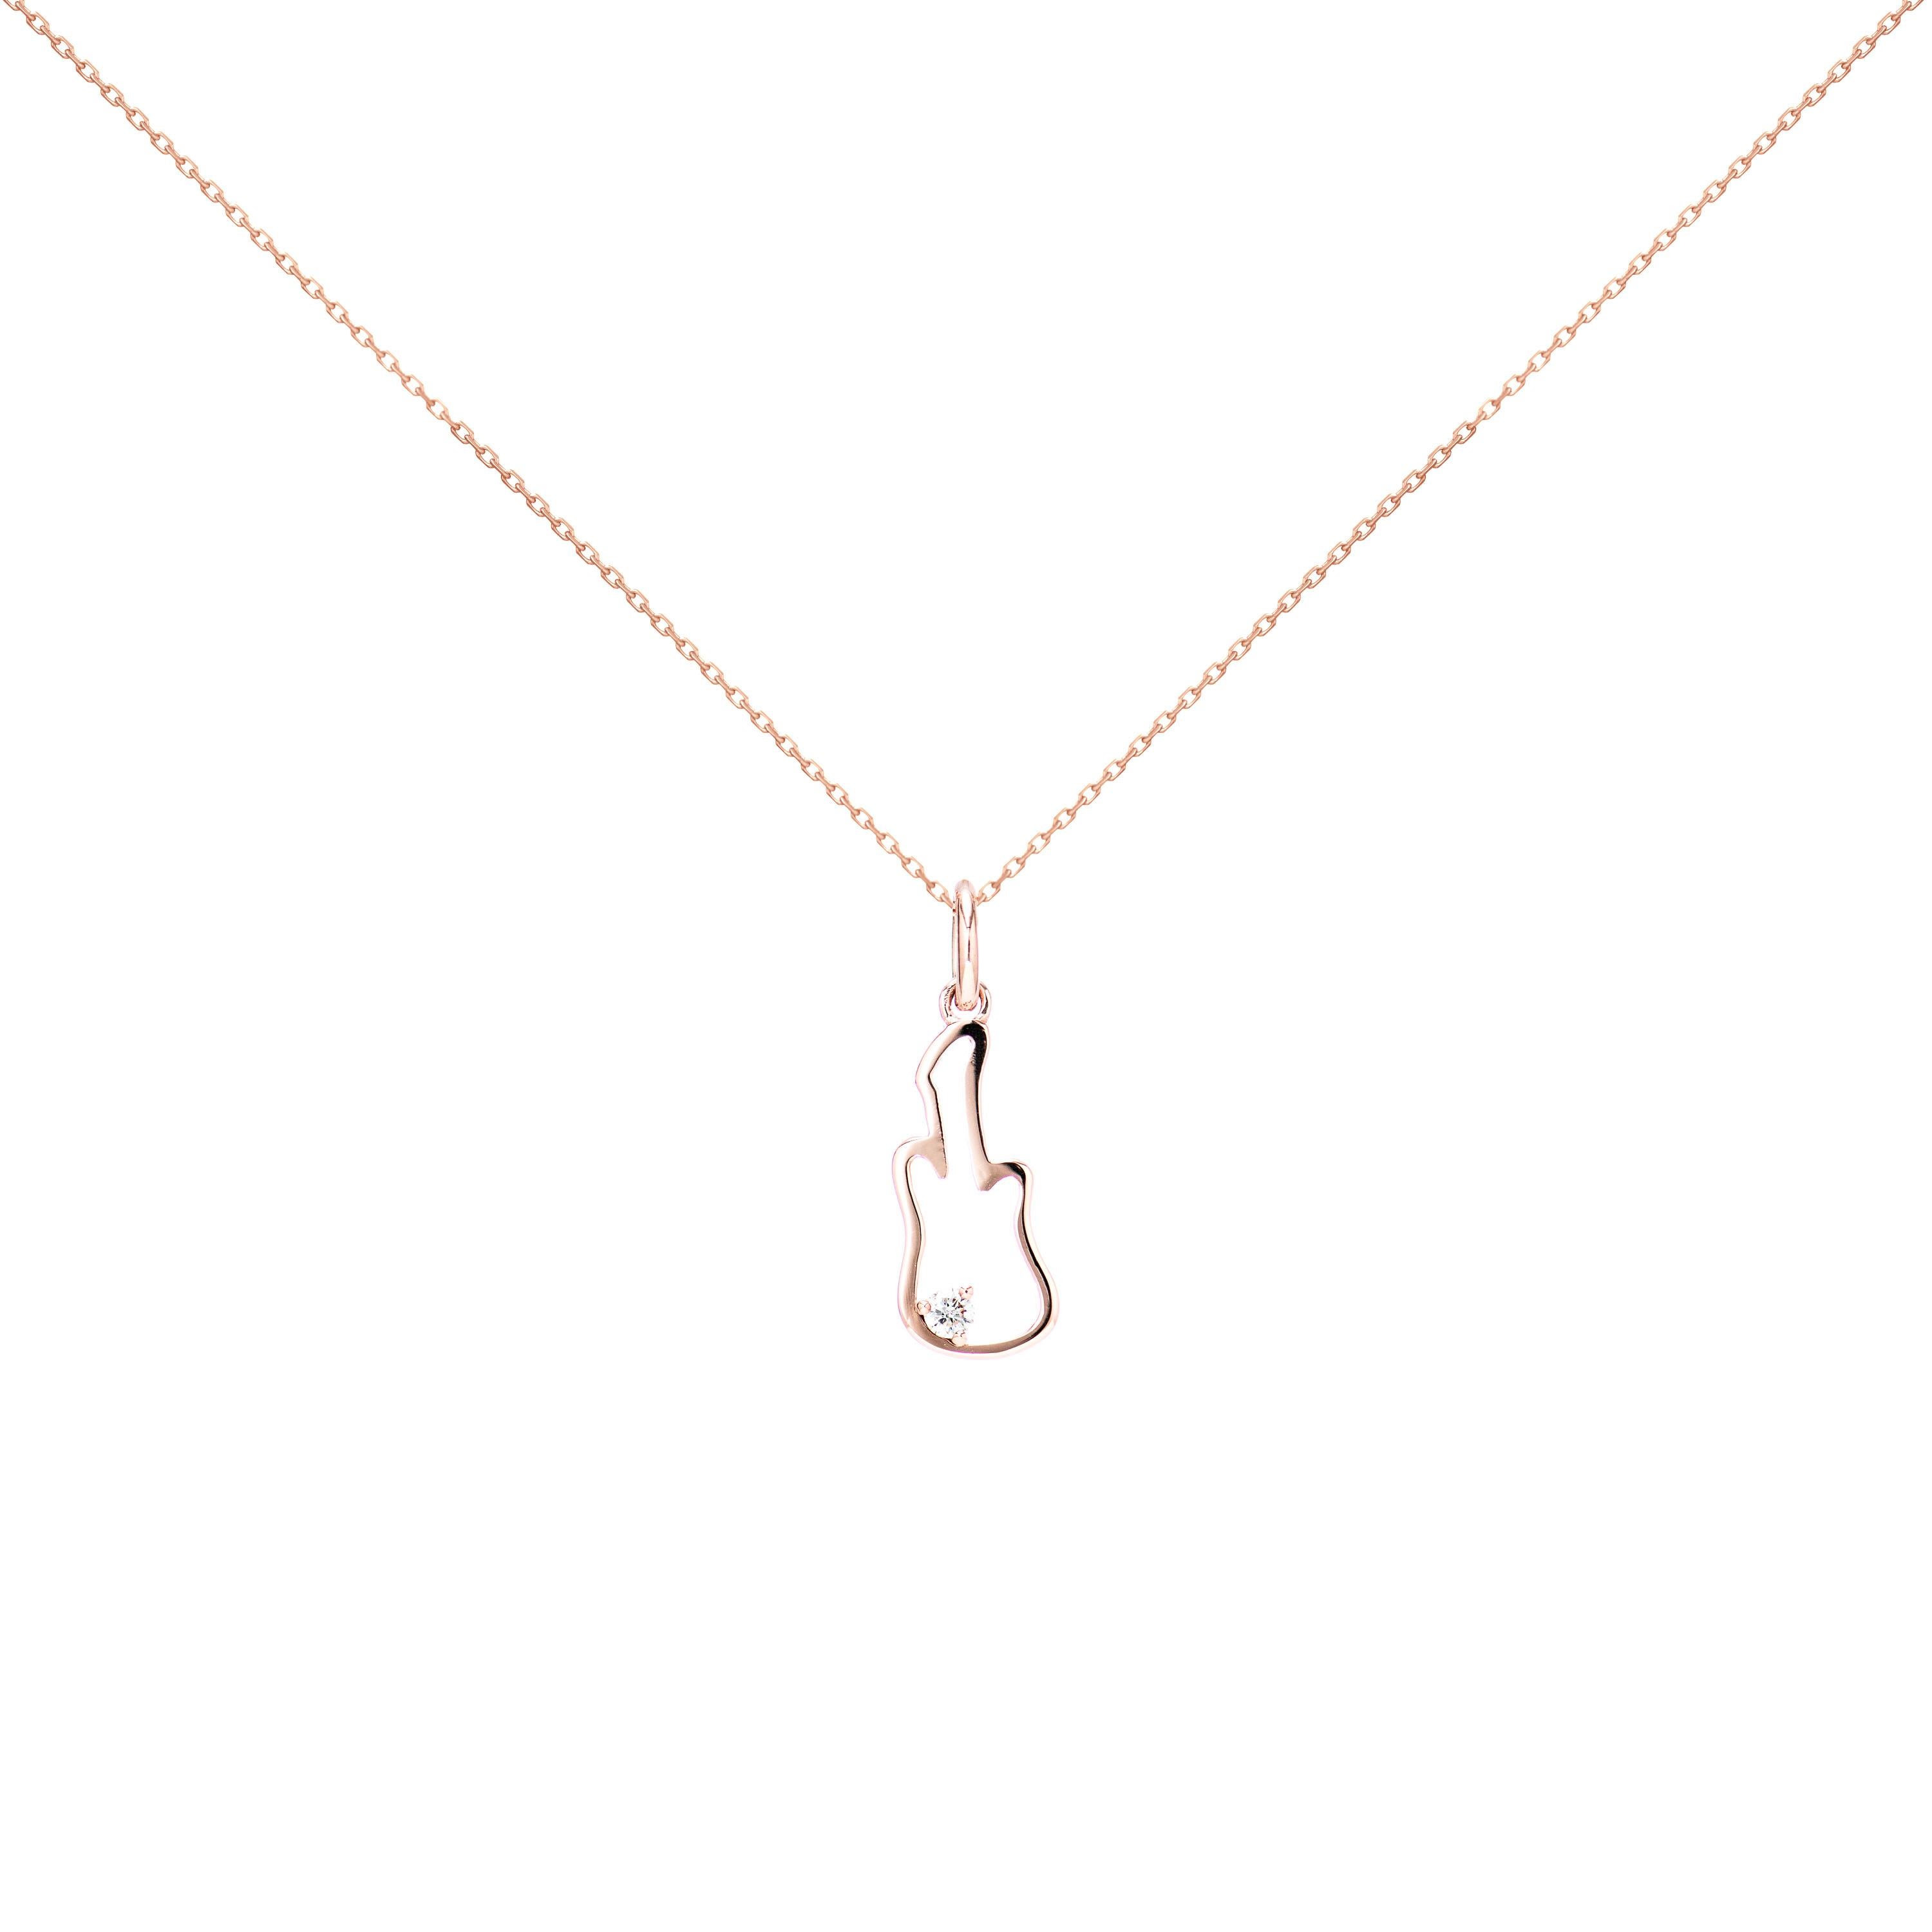 AS29
14kt rose gold diamond Guitar necklace
Follow the music or should we say follow the necklace? Constructed from 14kt rose gold and adorned with a diamond, this Guitar necklace from AS29 will be like music to your décolletage. Press